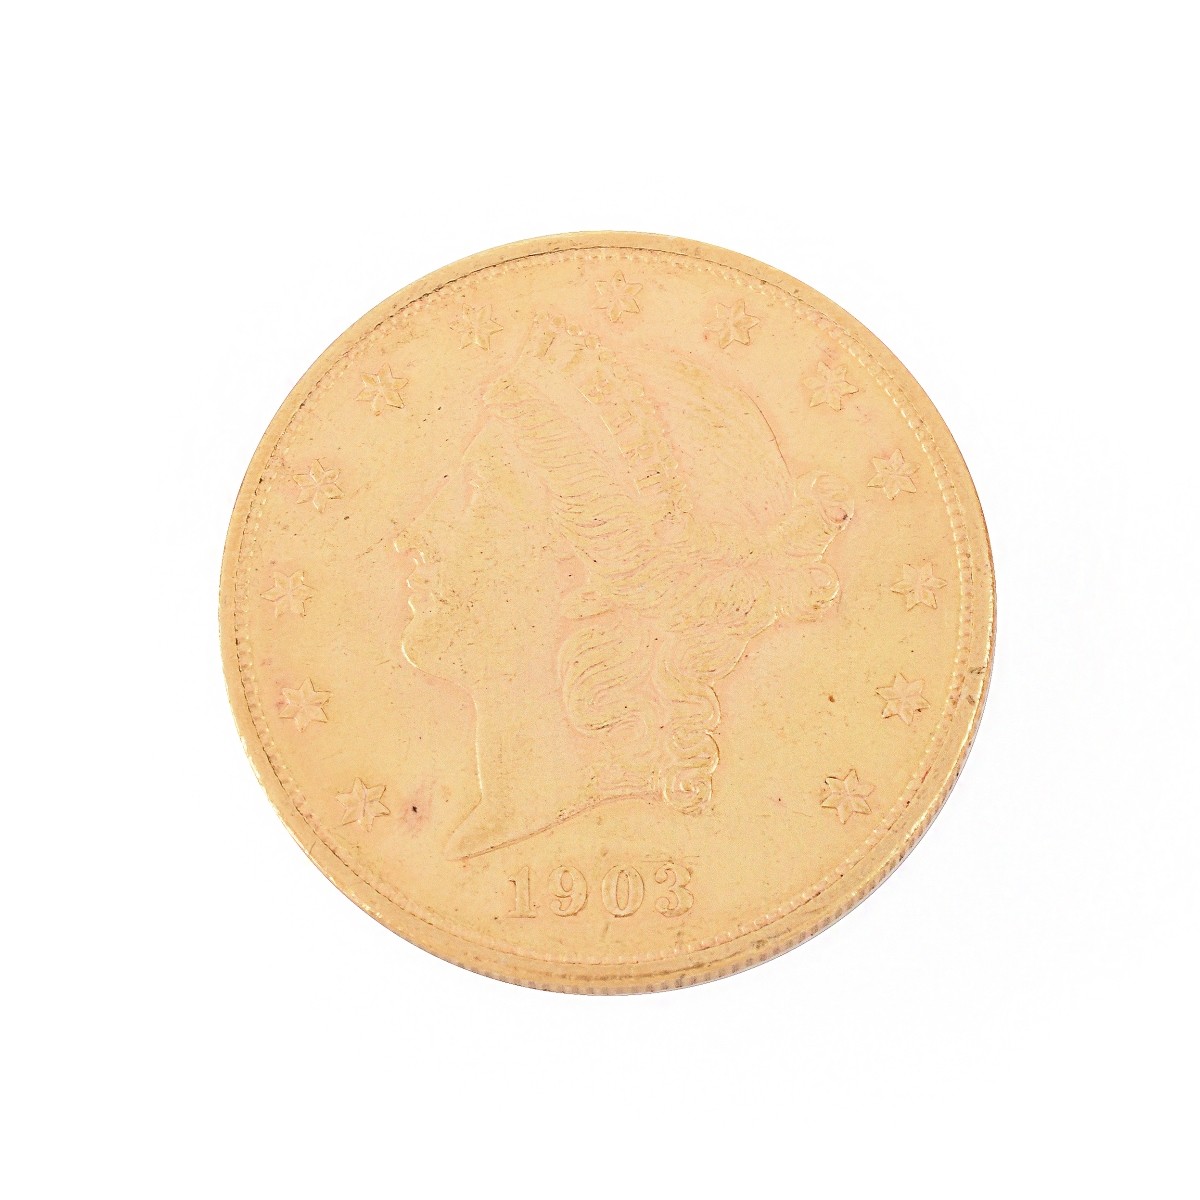 US 1903 $20 Liberty Double Eagle Gold Coin